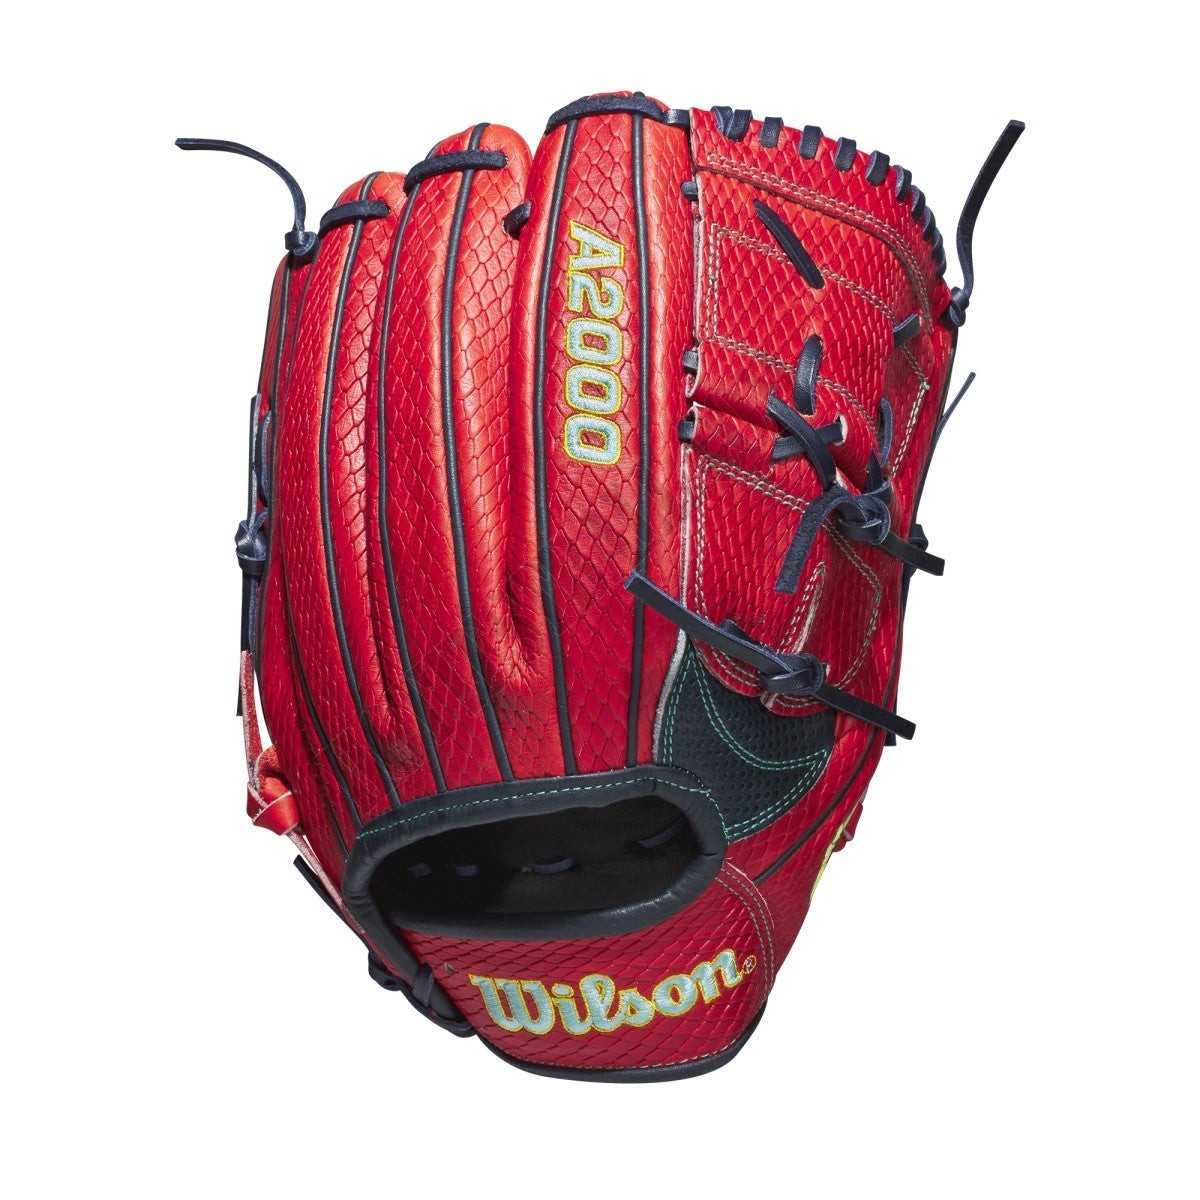 2021 A2000 B2 12" Mike Clevinger Game Model Pitcher's Baseball Glove ● Wilson Promotions - -1